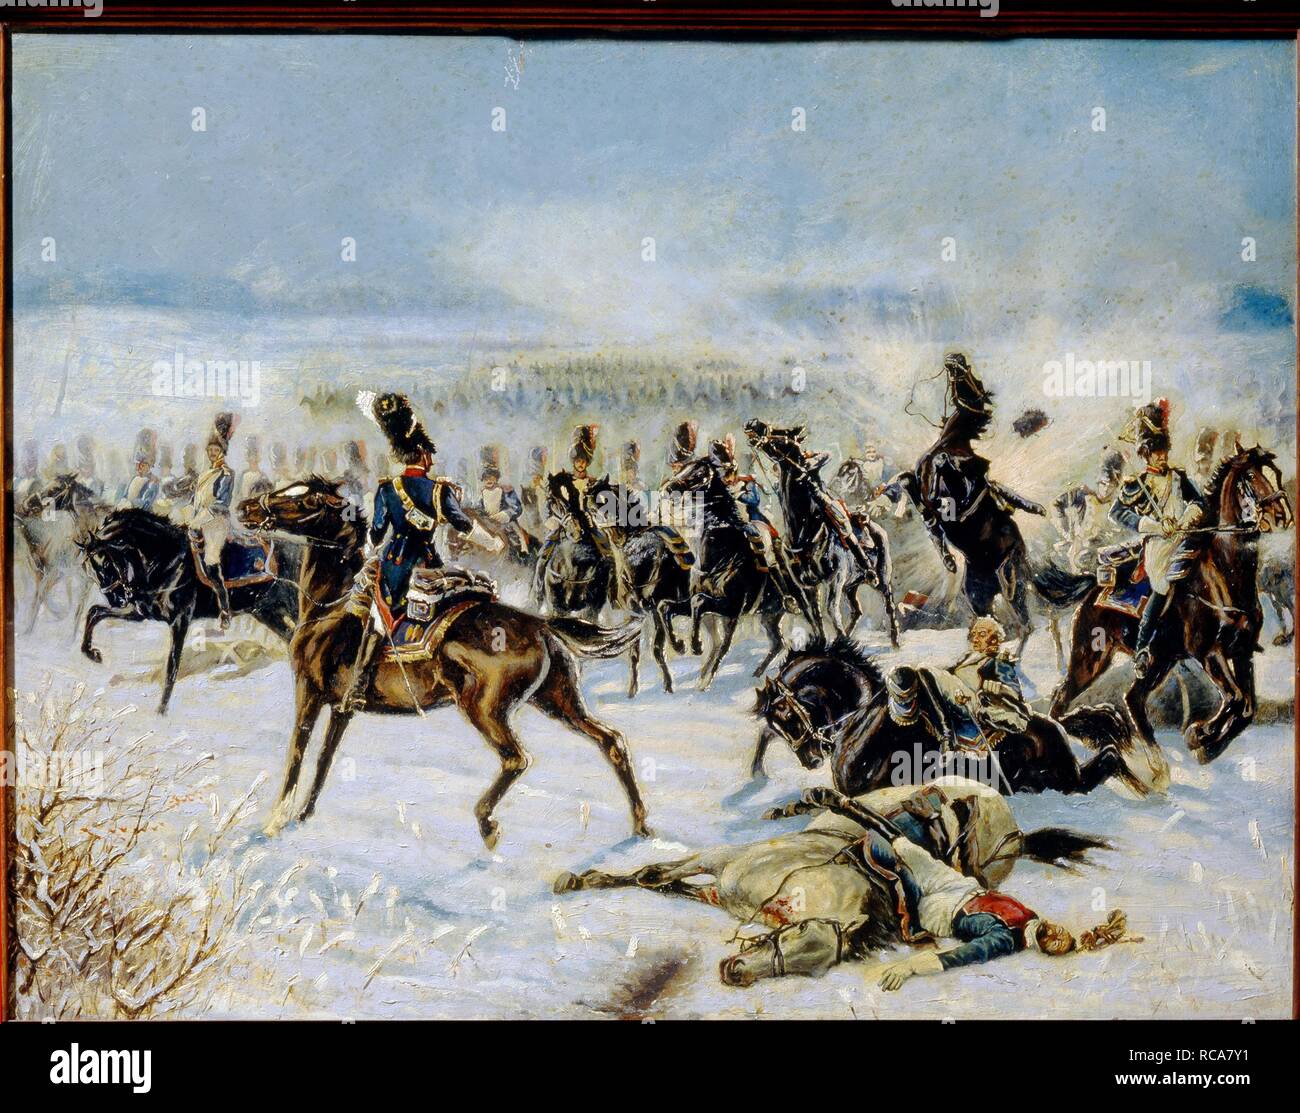 The Battle of Preussisch-Eylau on February 8, 1807. Museum: State Borodino War and History Museum, Moscow. Author: Malespina, Louis Ferdinand. Stock Photo